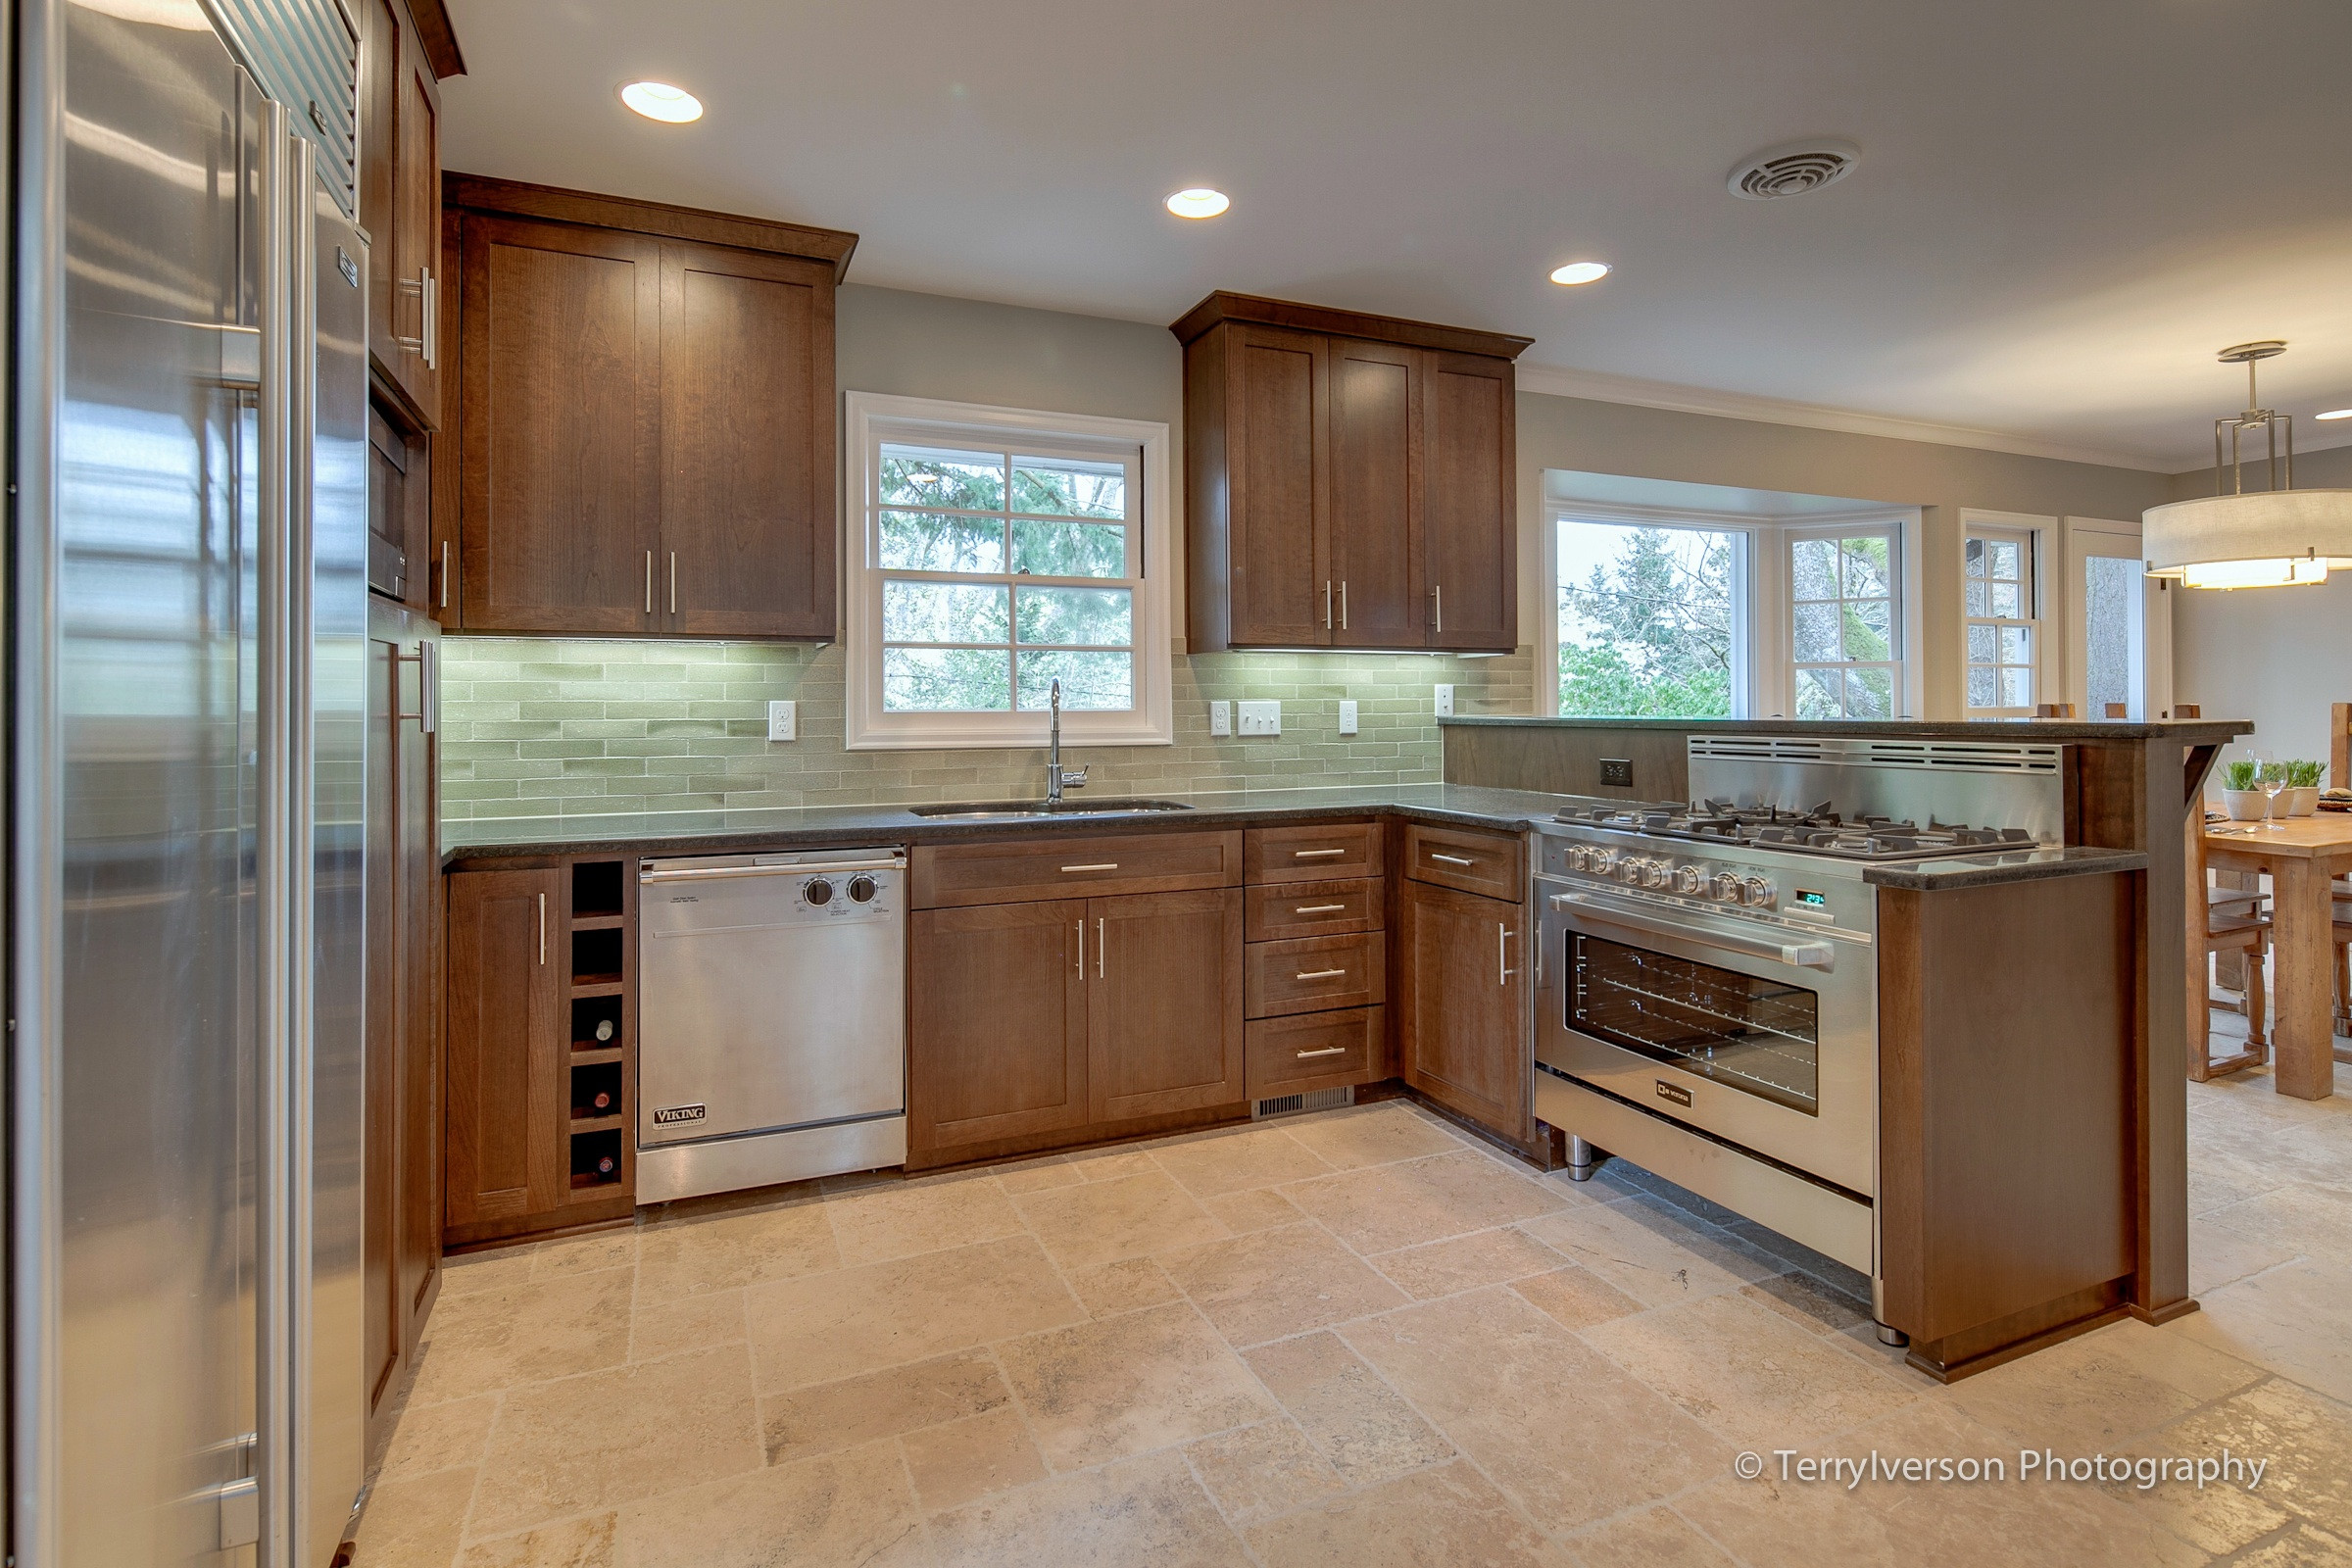 Travertine Kitchen Tiles
 Kitchen With Patterned Travertine Tile Floor — Envision